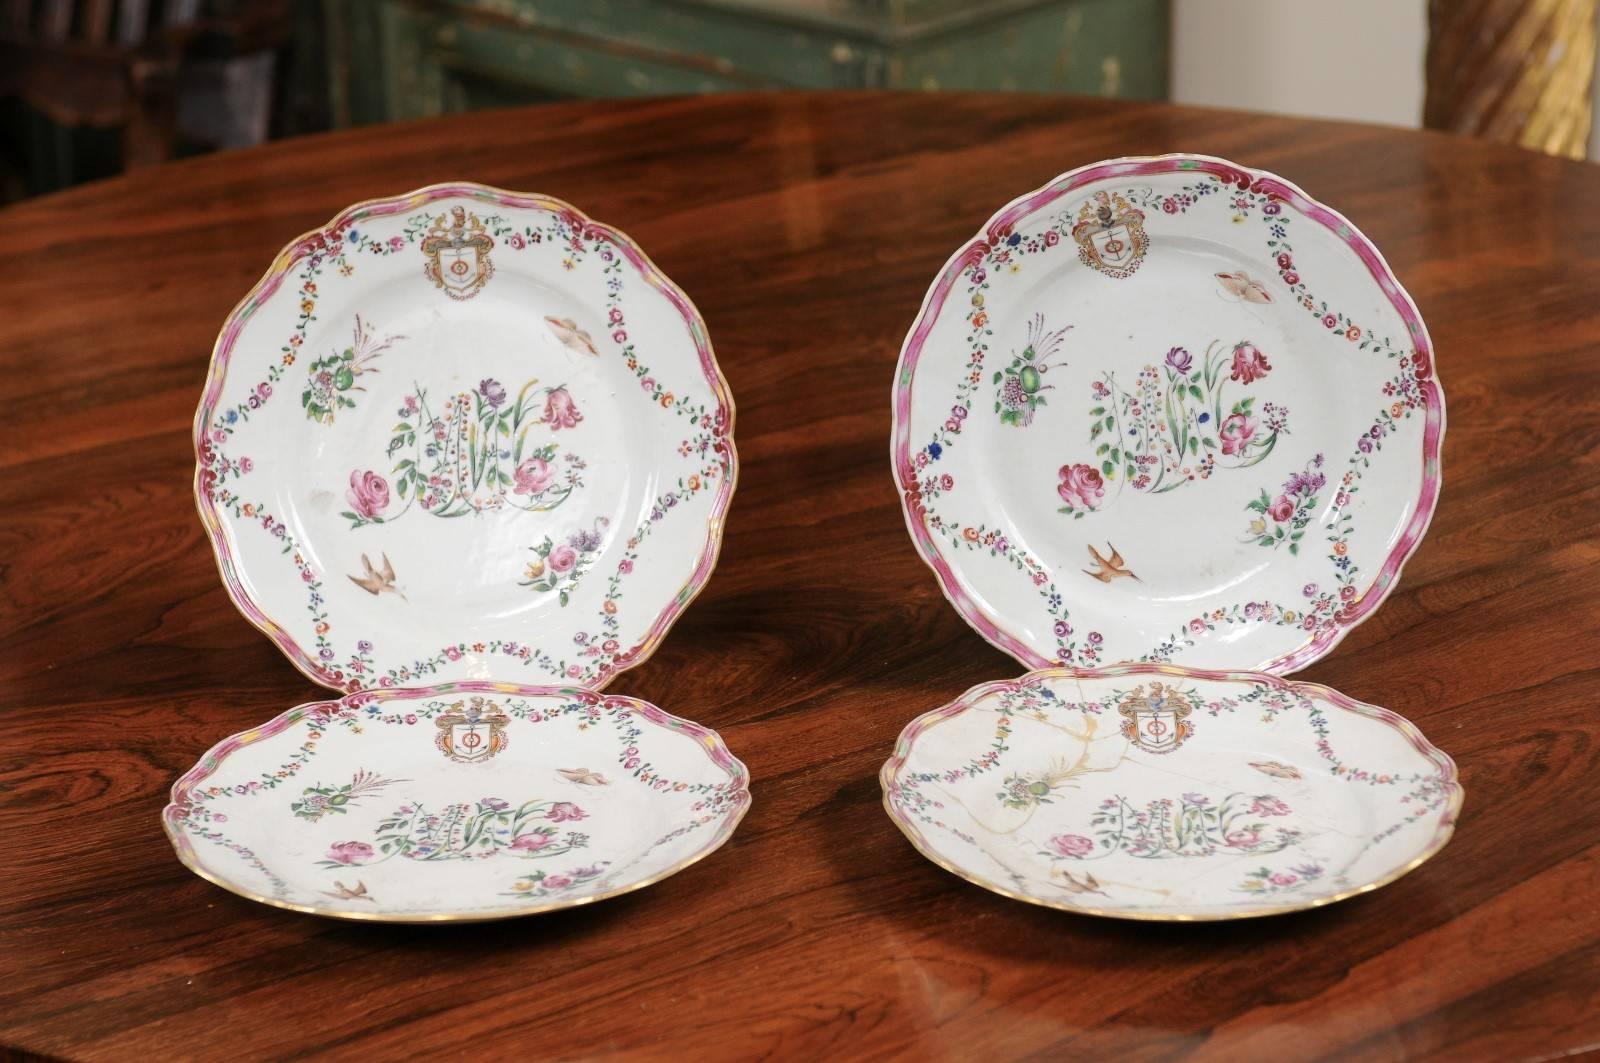 Set of 4 Chinese Export Porcelain Plates with Floral Decoration & Armorial Crest, ca. 1760